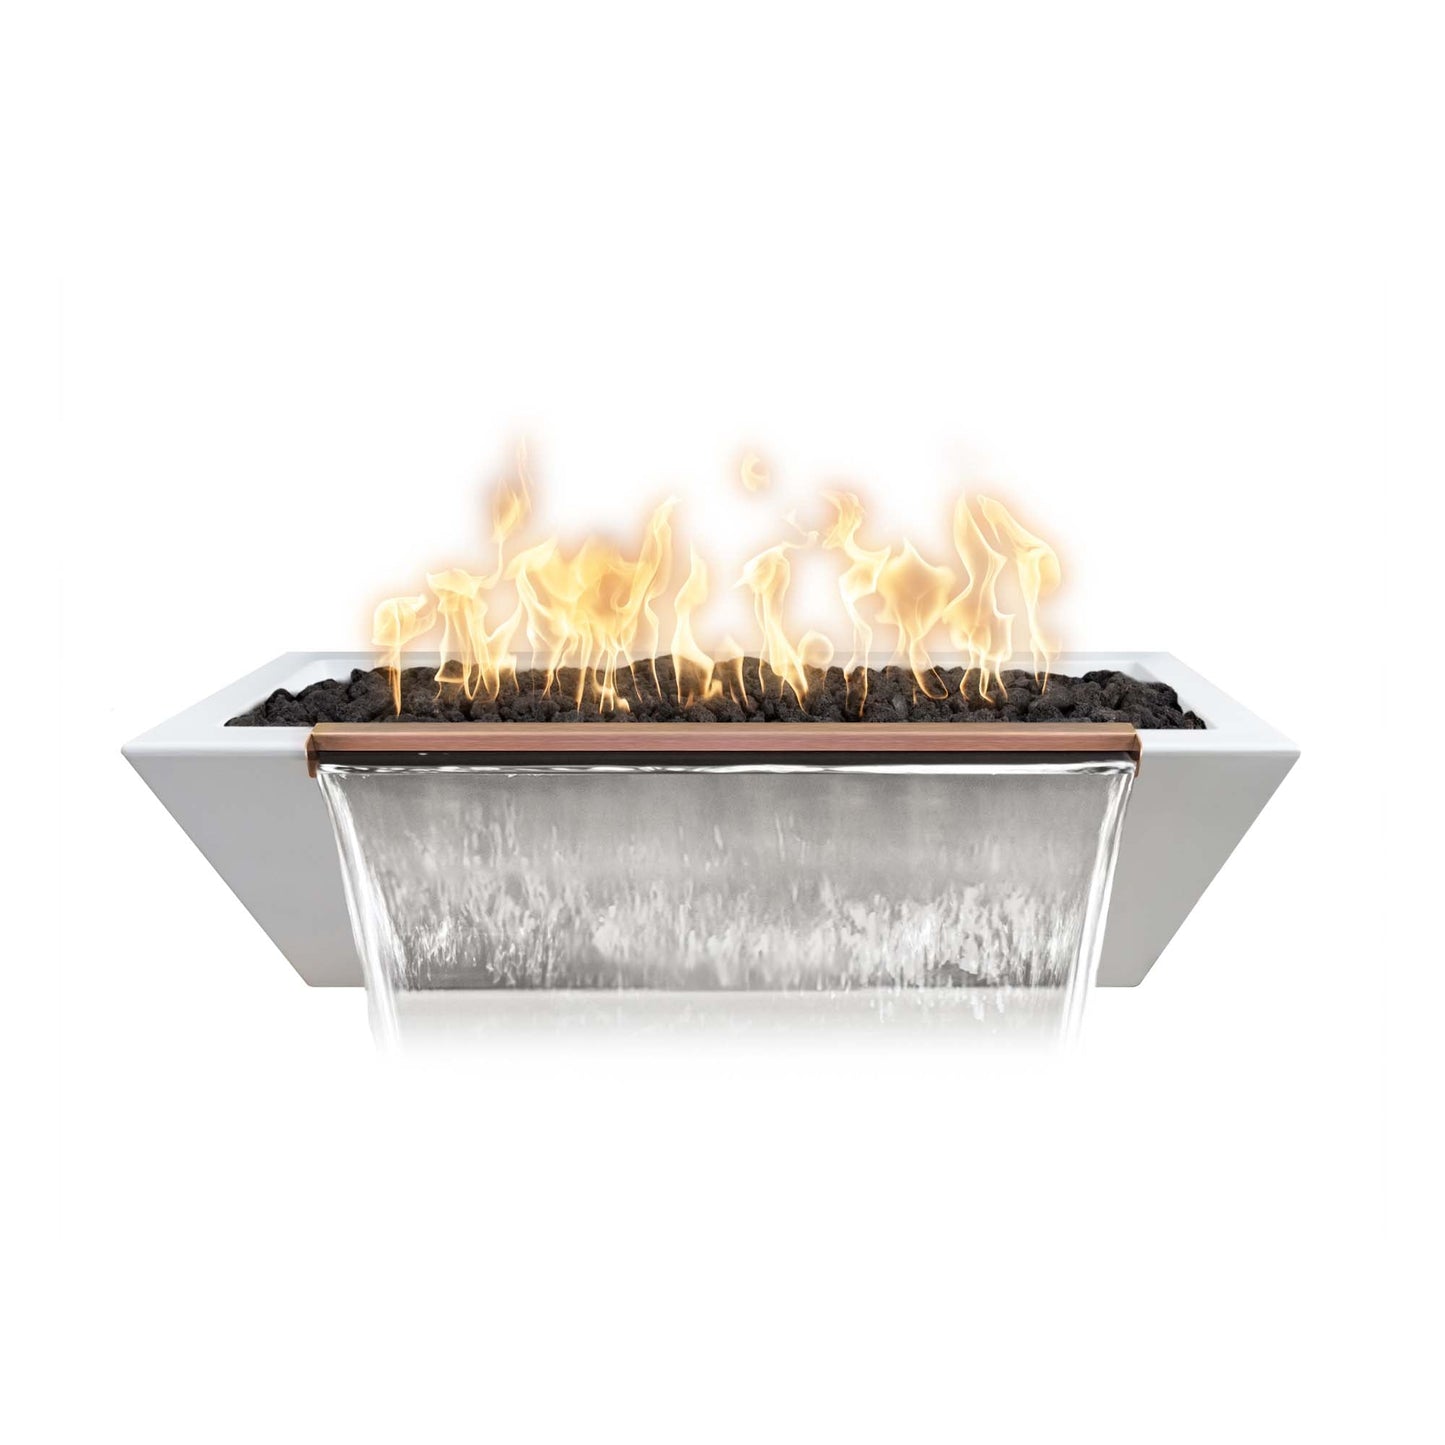 The Outdoor Plus Linear Maya 60" Metallic Slate GFRC Concrete Natural Gas Fire & Water Bowl with 12V Electronic Ignition